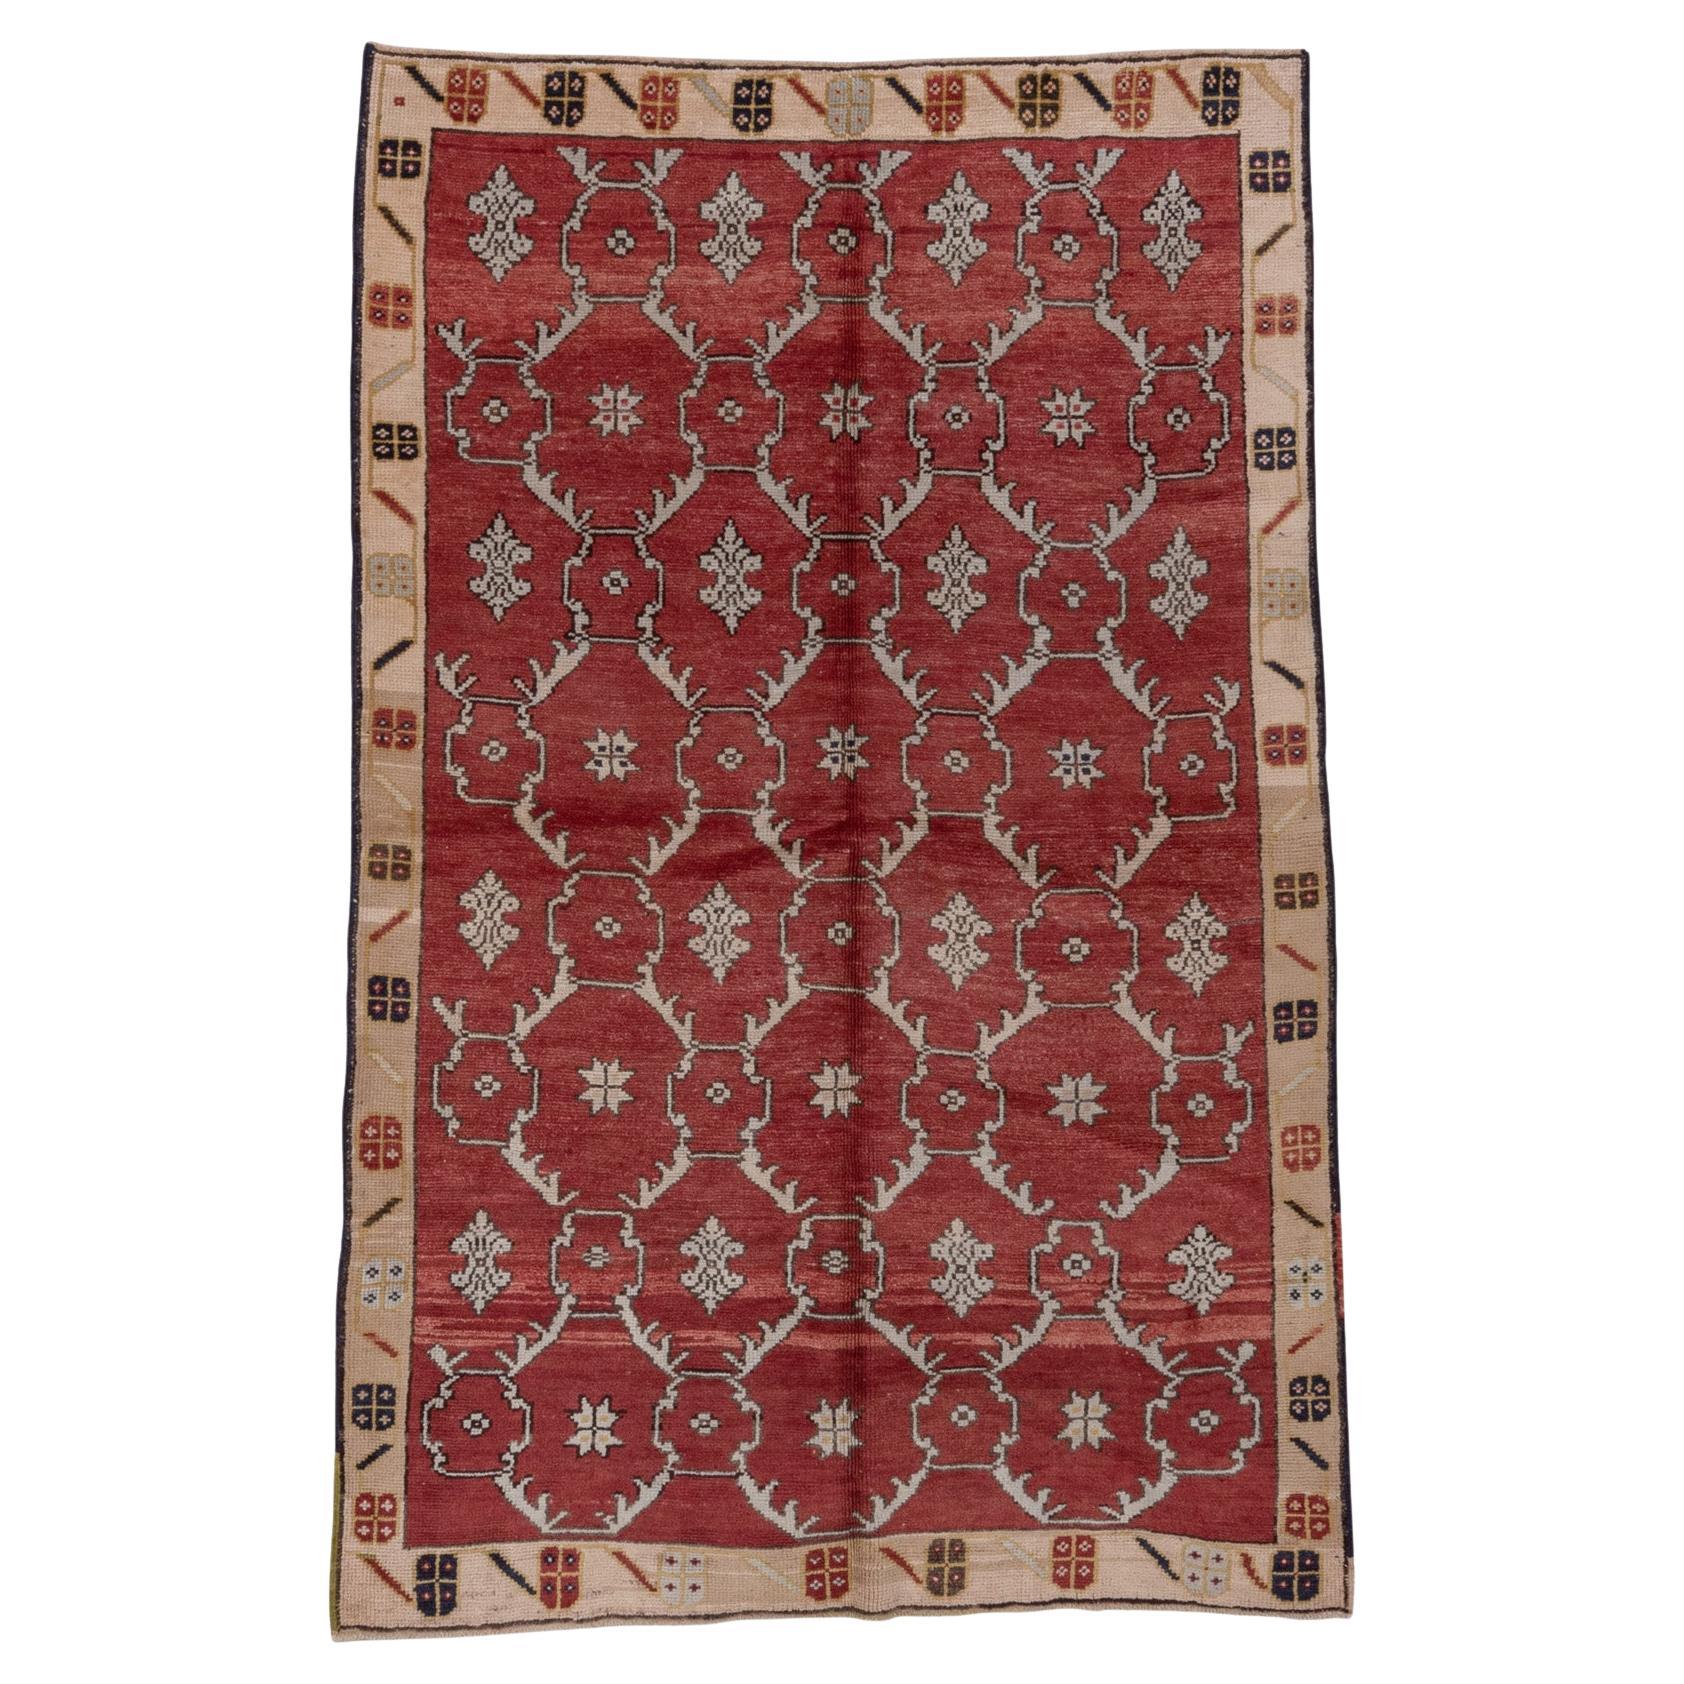 Eliko Rugs by David Ariel Vintage Oushak Rug, Red Allover Field, High Pile For Sale